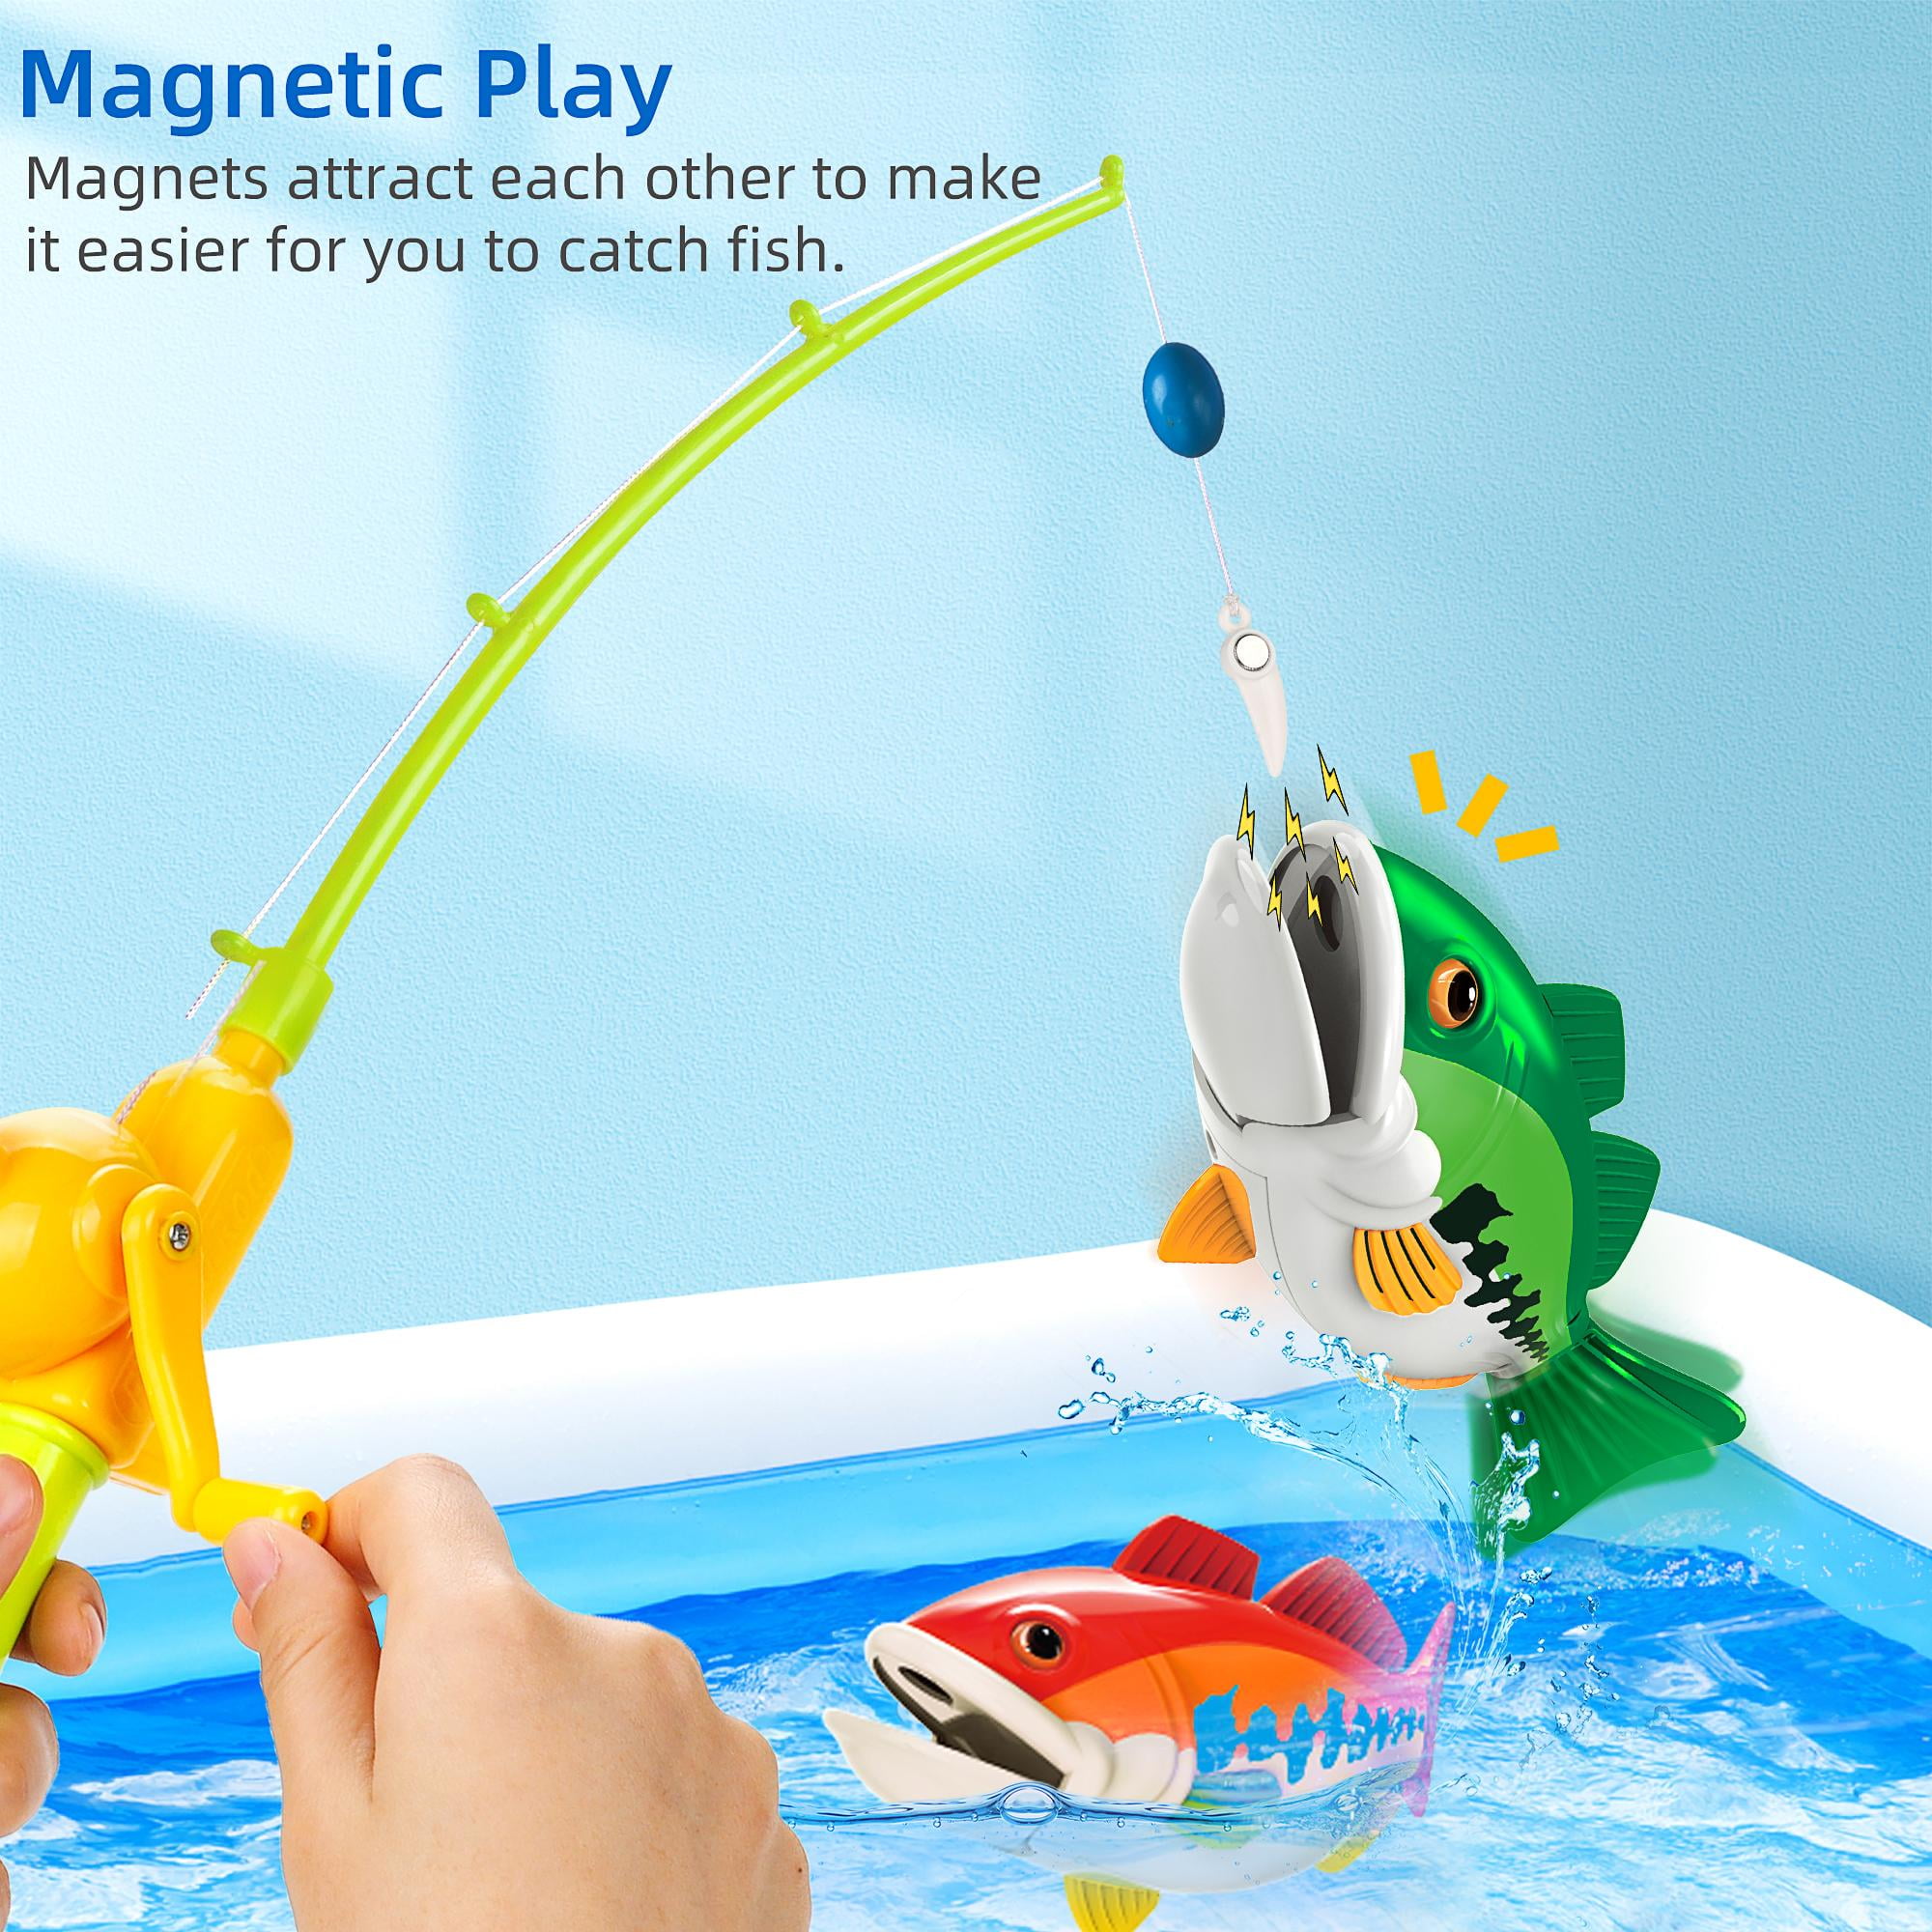 Multiple Sets Available Magnetic Fishing Toy Set For Family Gathering With  Cartoon Fish, Retractable Fishing Rod, Inflatable Pool, Air Pump, Mesh Net,  Party Fishing Game